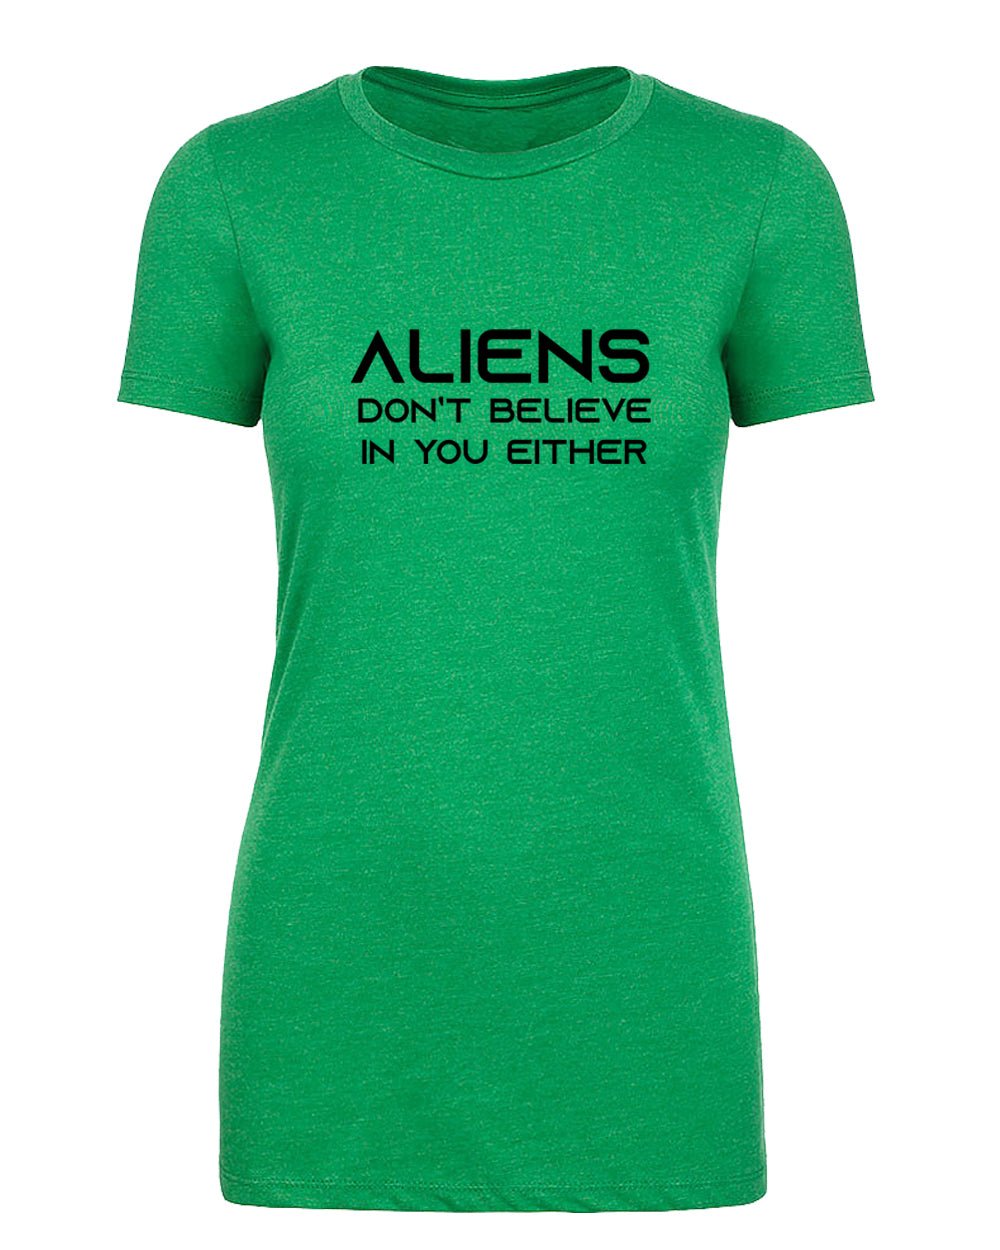 Aliens Don't Believe In You Either Womens T Shirts - Mato & Hash